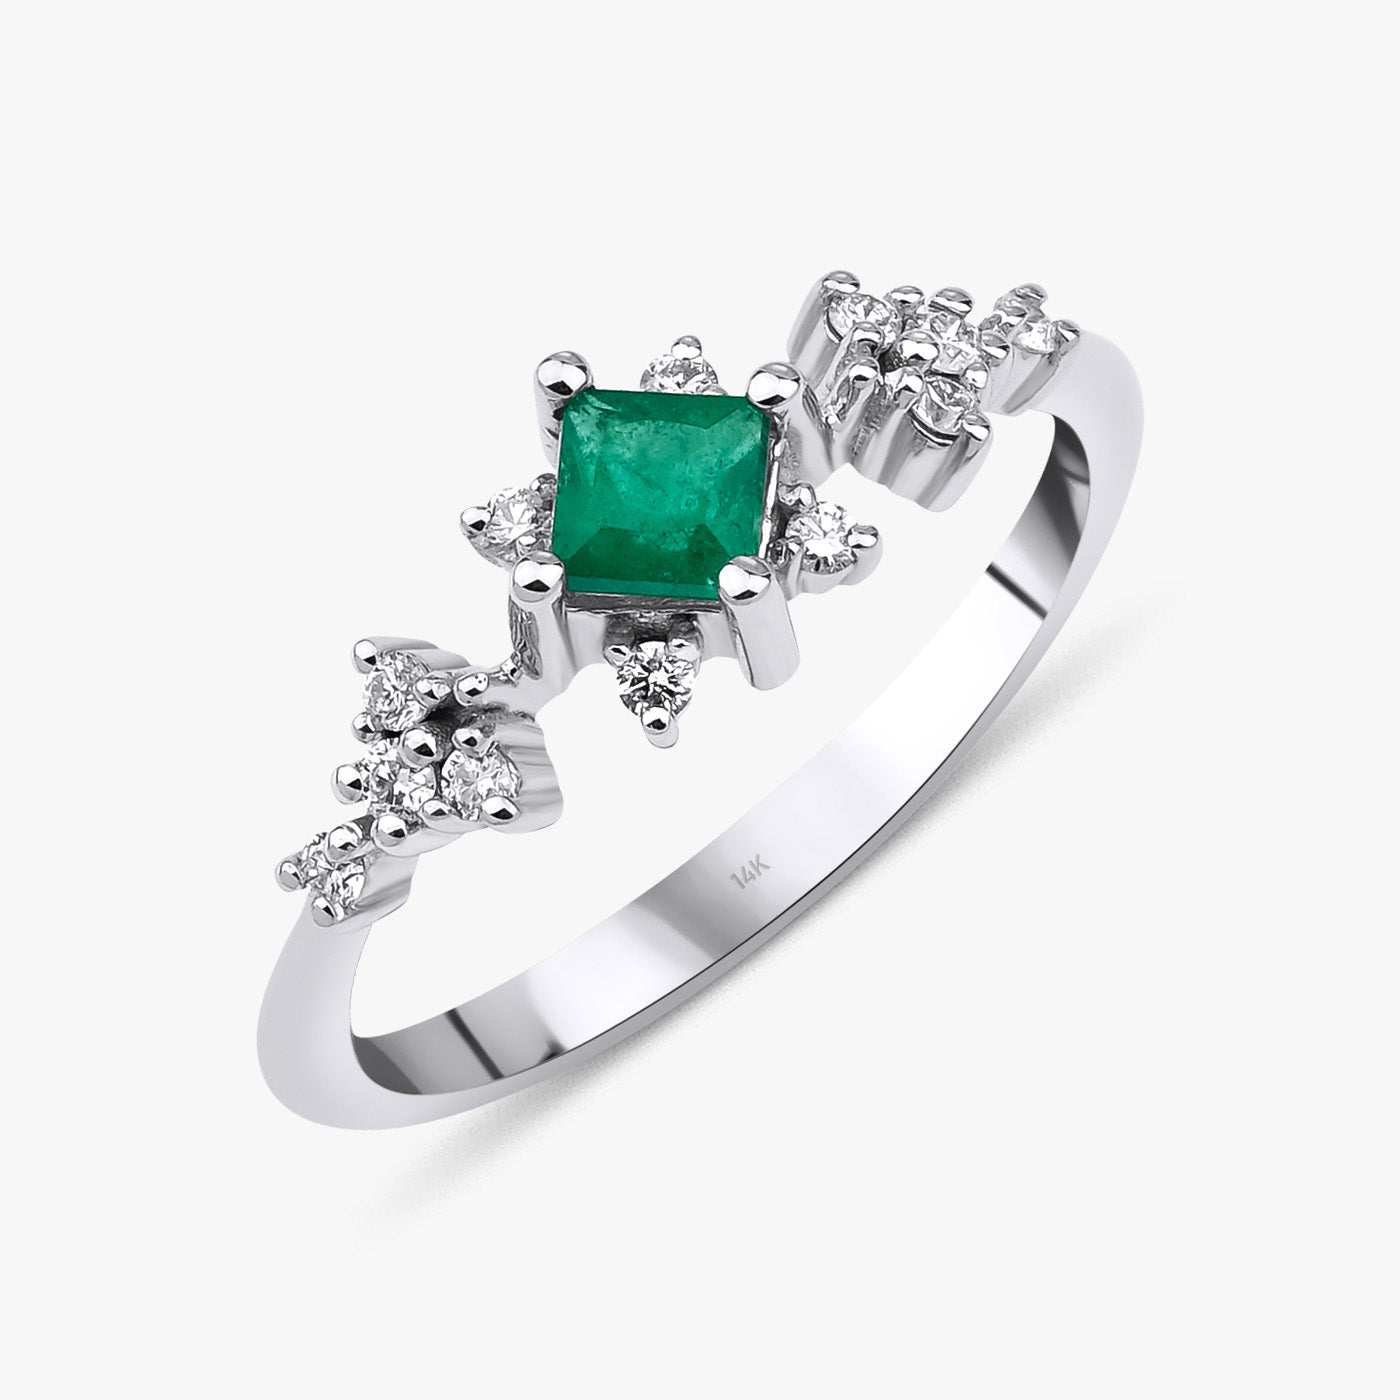 Princess Cut Emerald and Diamond Ring in 14K Gold